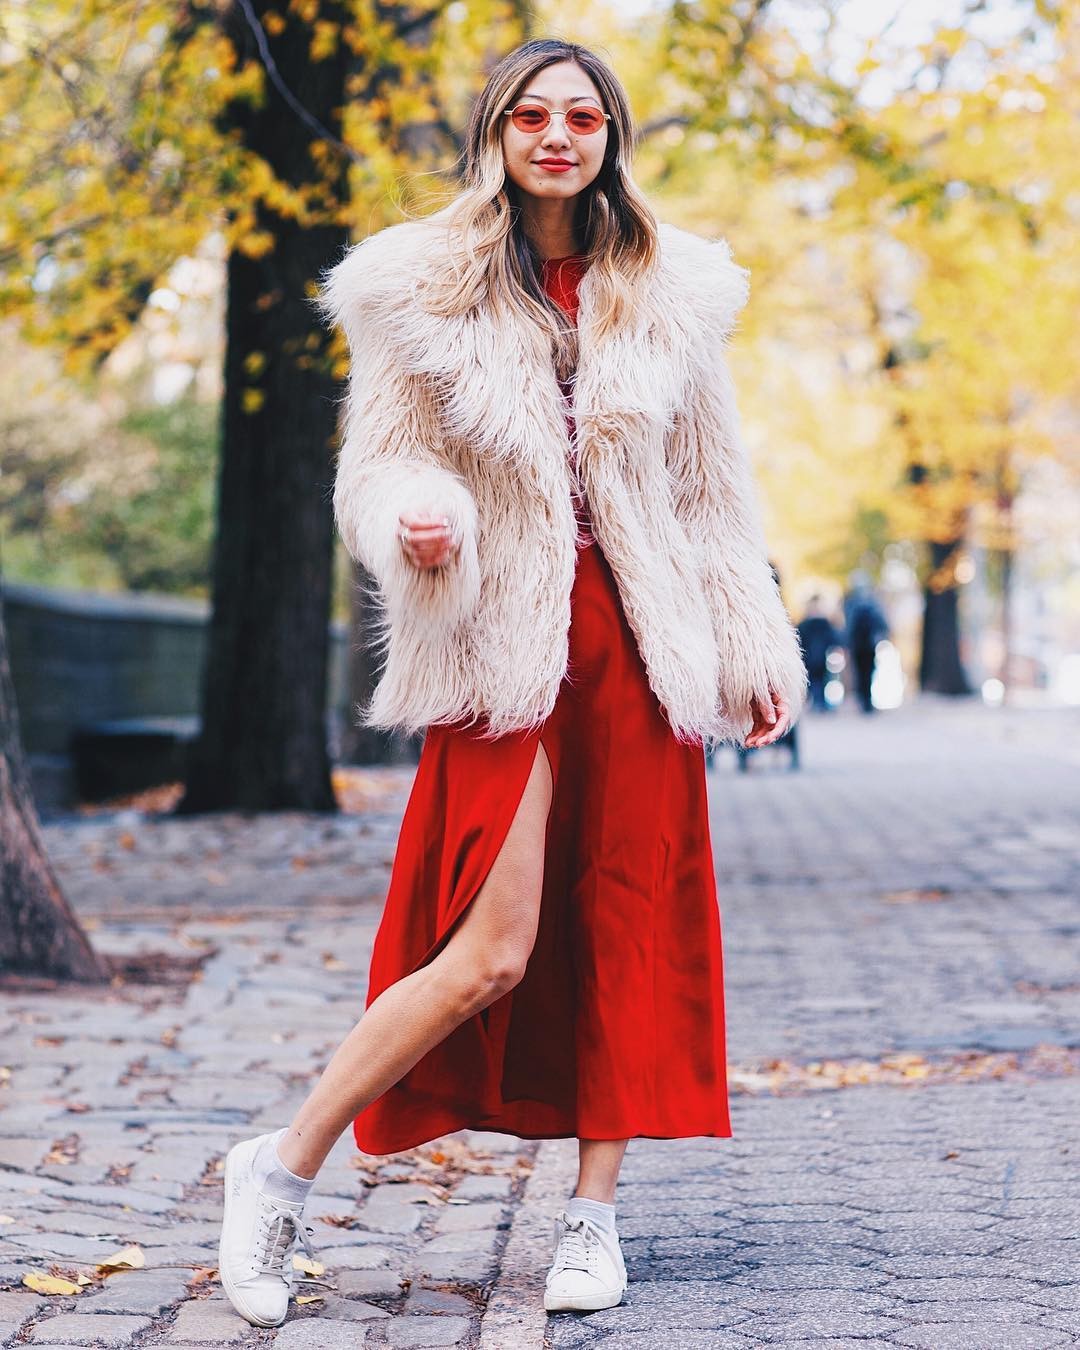 What to Wear to a Fashion Show? 37 Outfit Ideas